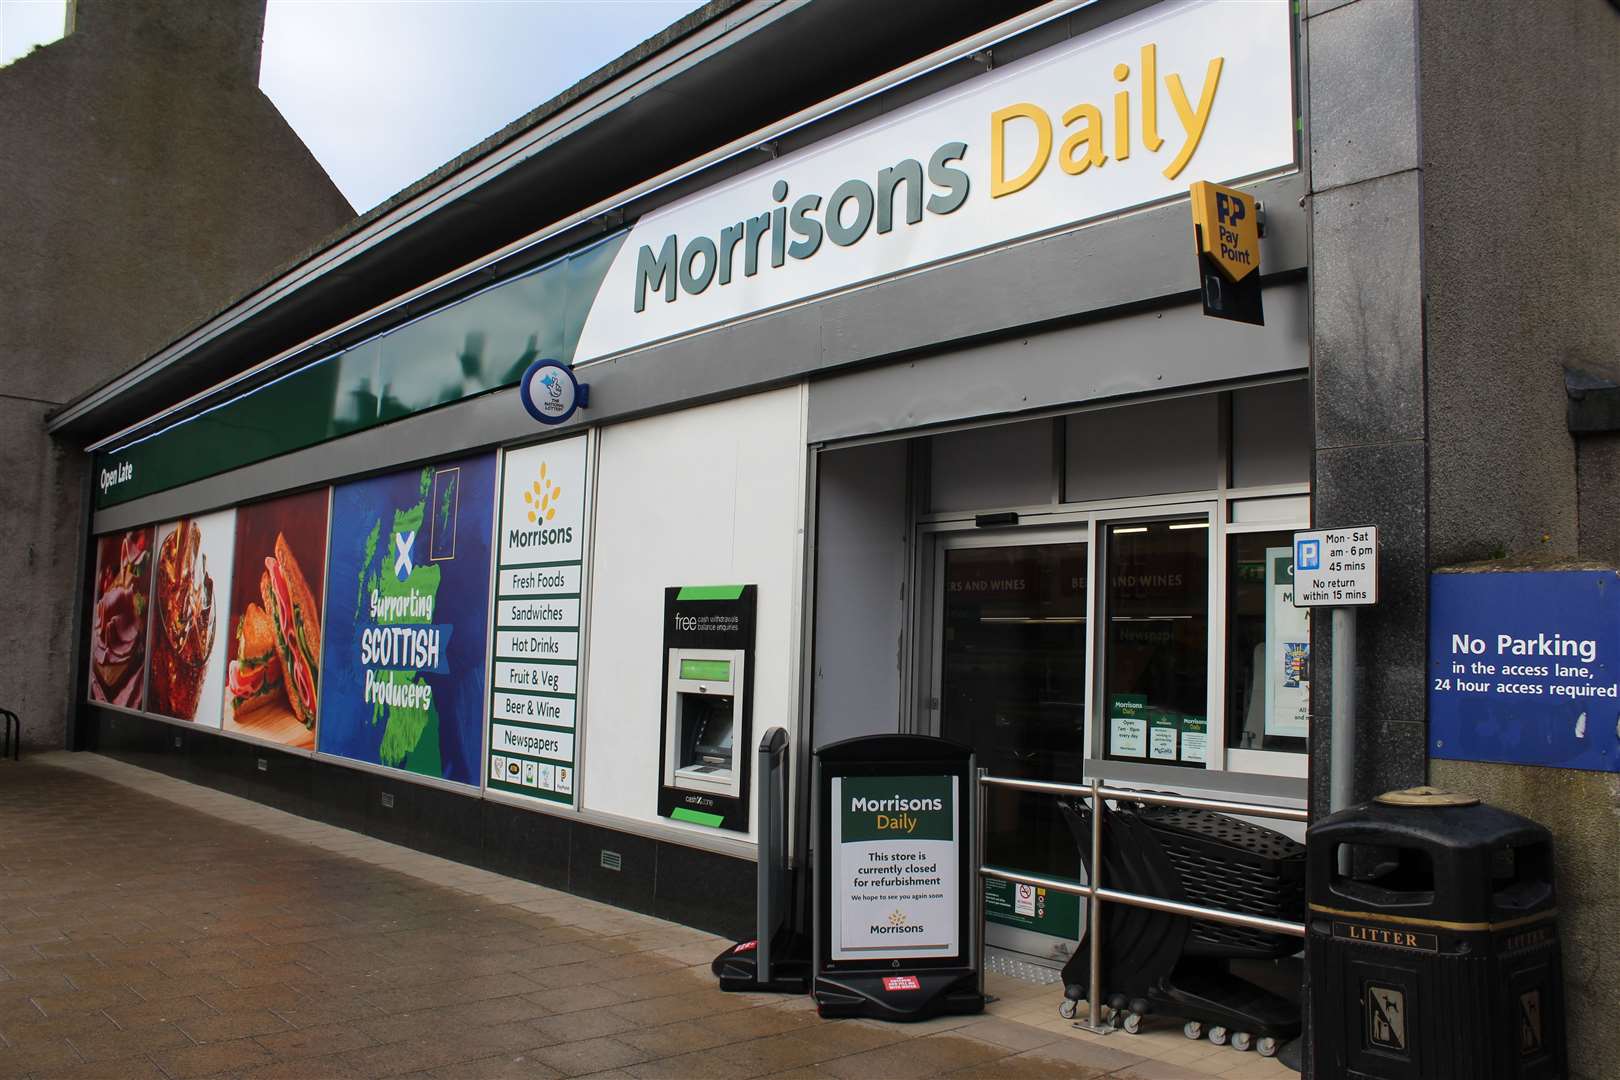 The McColl's store in Banff has been rebranded to a Morrisons Daily.